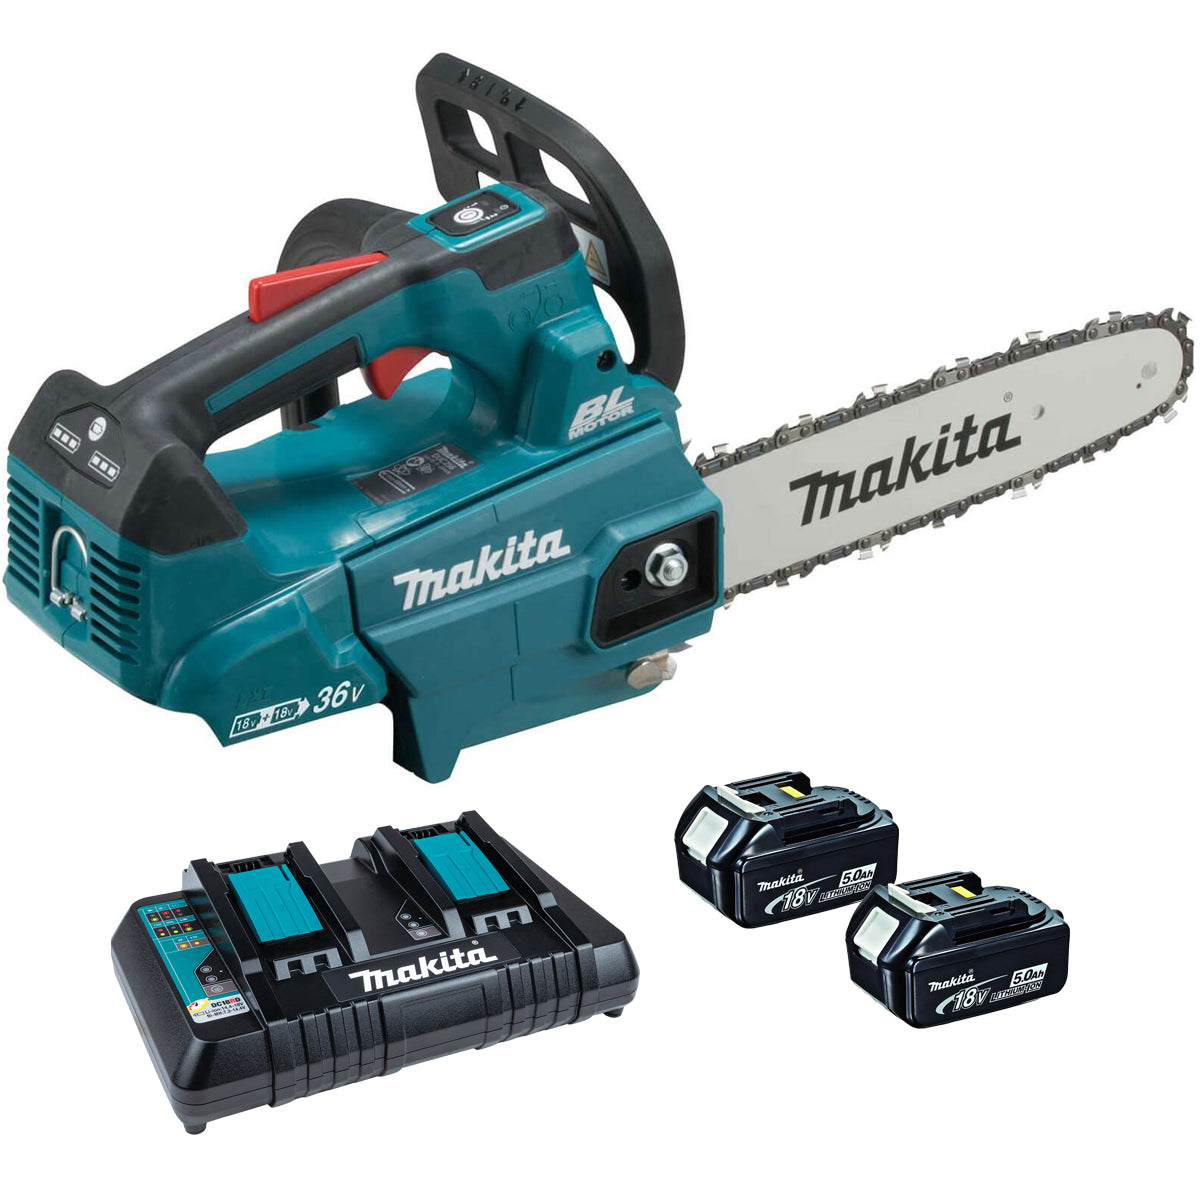 Makita DUC256PT2 36V Brushless Chainsaw 25cm with 2 x 5.0Ah Batteries & Charger